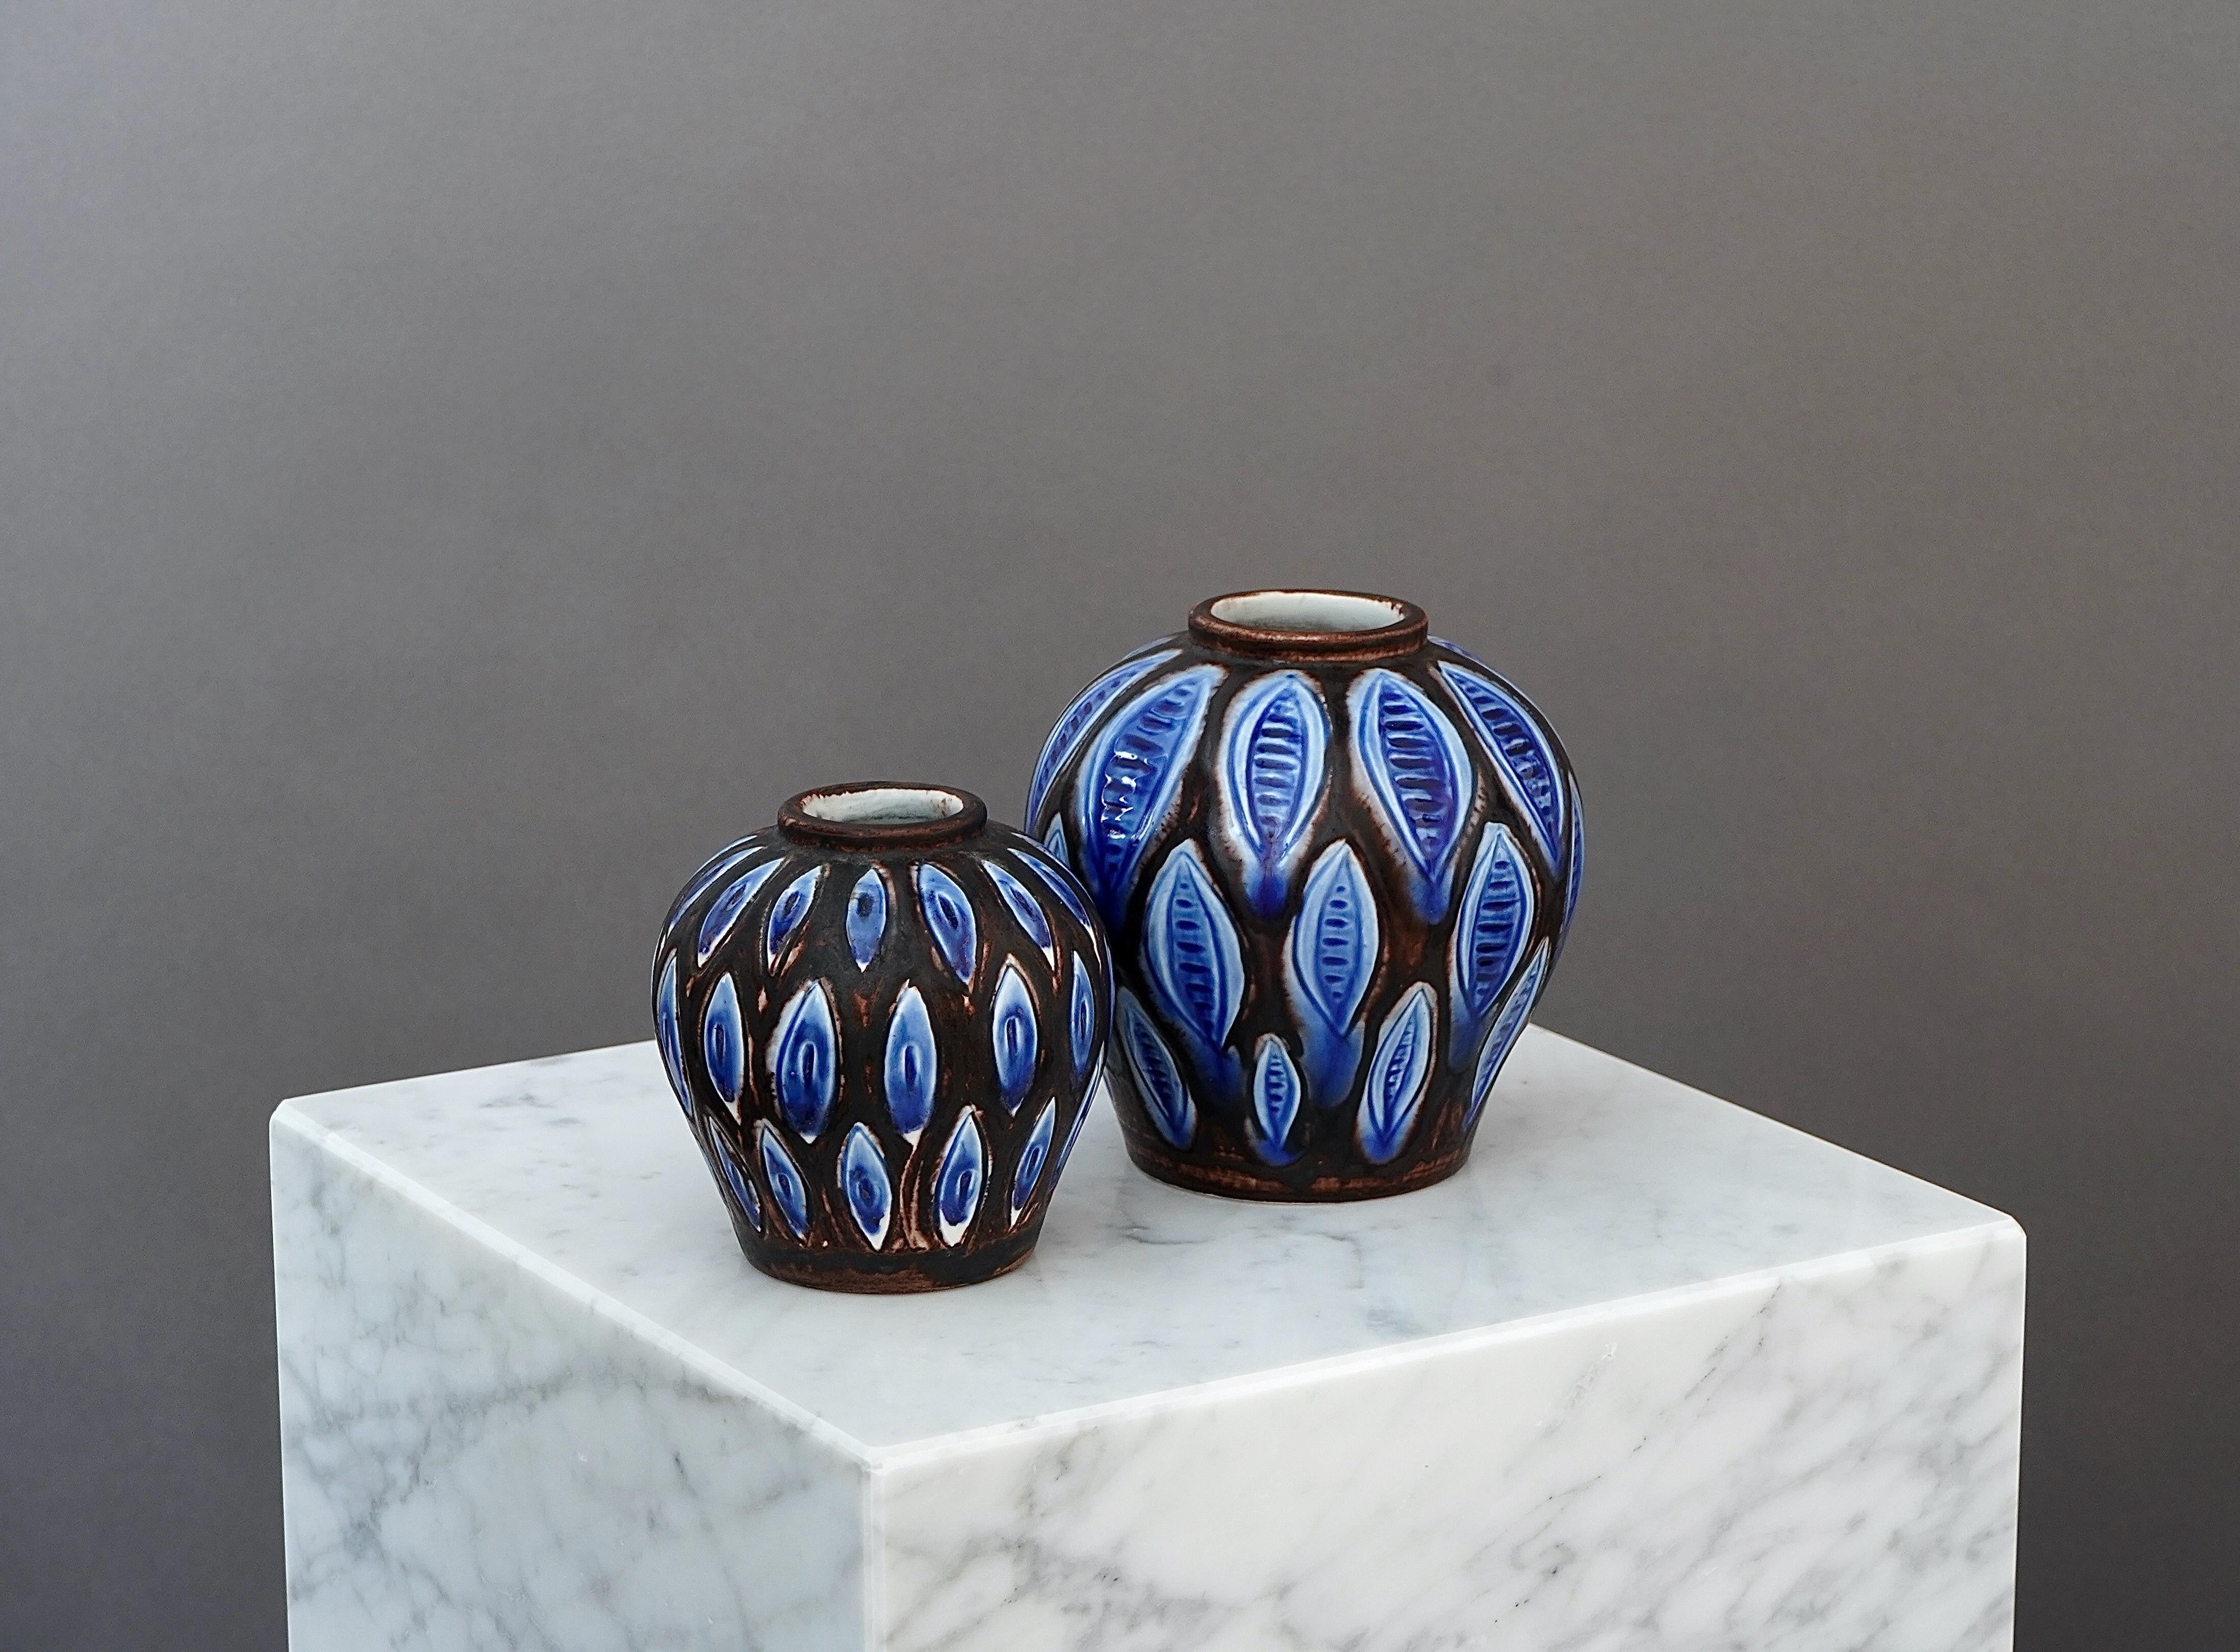 Set of 2 beautiful stoneware vases with amazing glaze.
Made by Hertha Bengtson for Rörstrand, Sweden, 1950s.

Excellent condition.
Signed 'Bengtson' / 'HB' and 'R' för Rörstrand.

Hertha Bengtson (1917-1993) is one of the well-known representatives